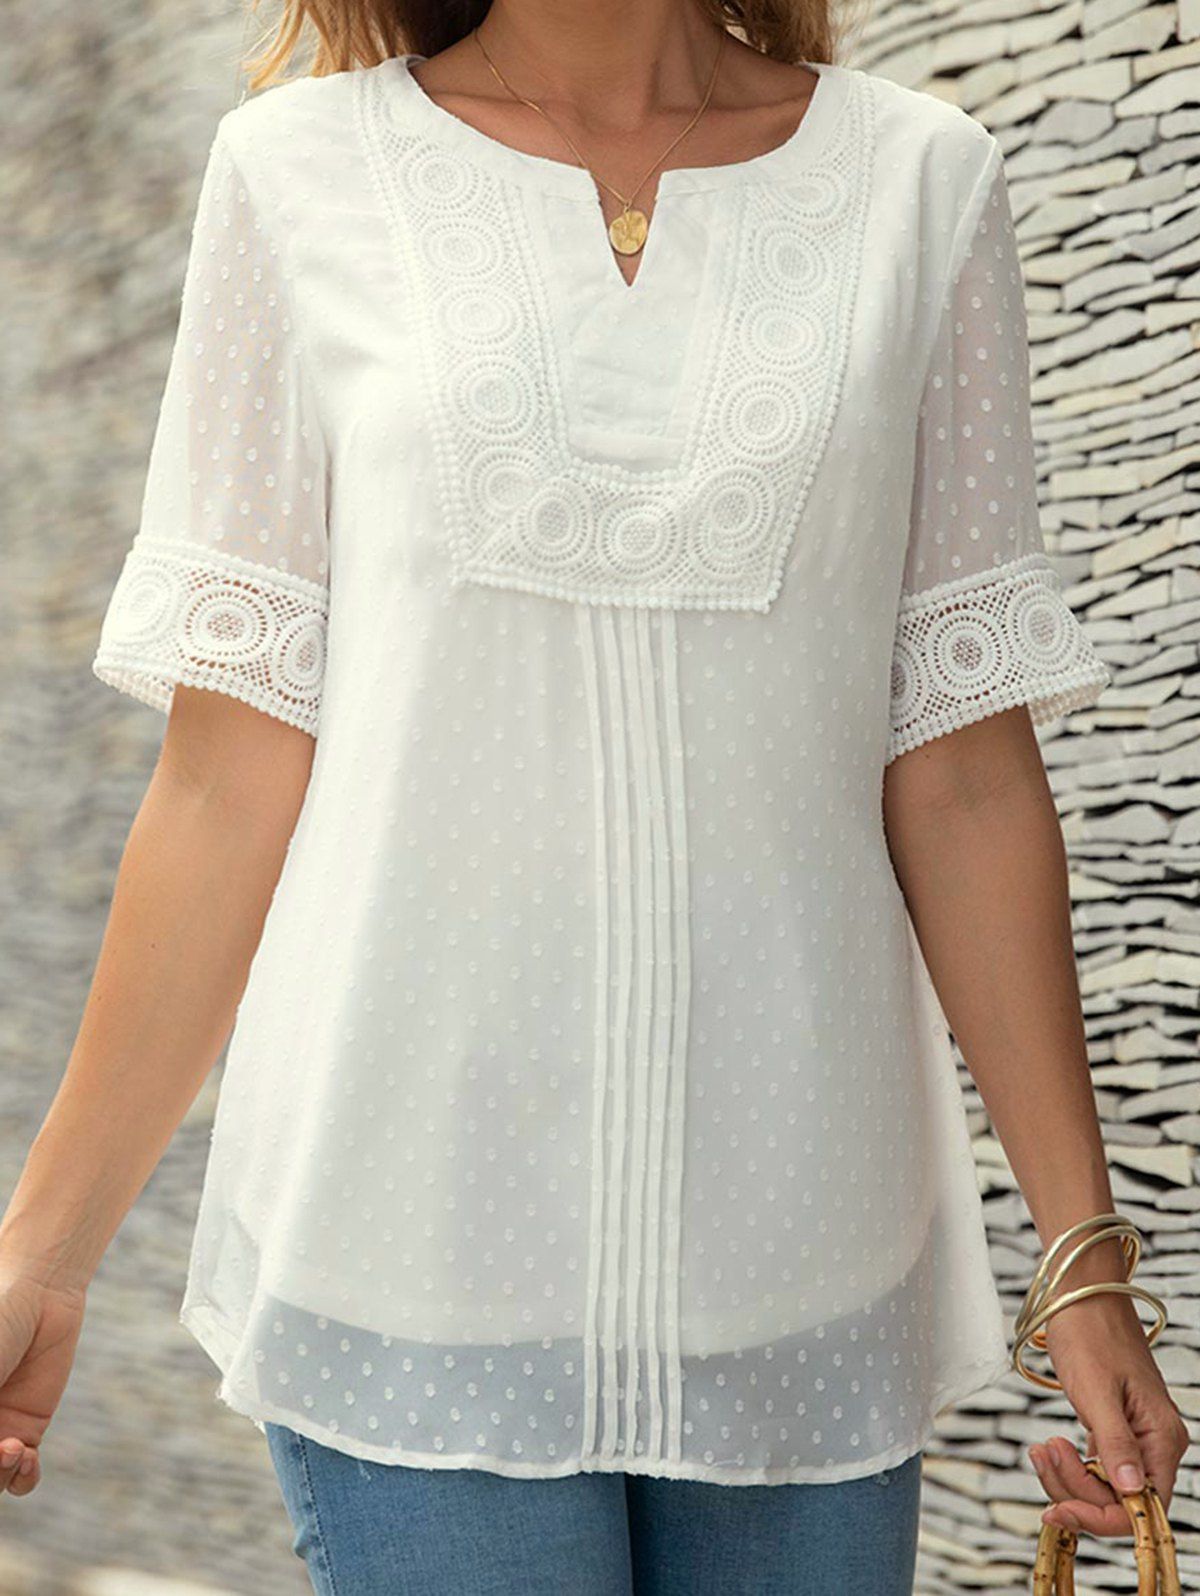 Ethnic Blouse Swiss Dots Stripe Sheer Sleeve Blouse Hollow Out Crochet Lace Notched Top - WHITE 3XL